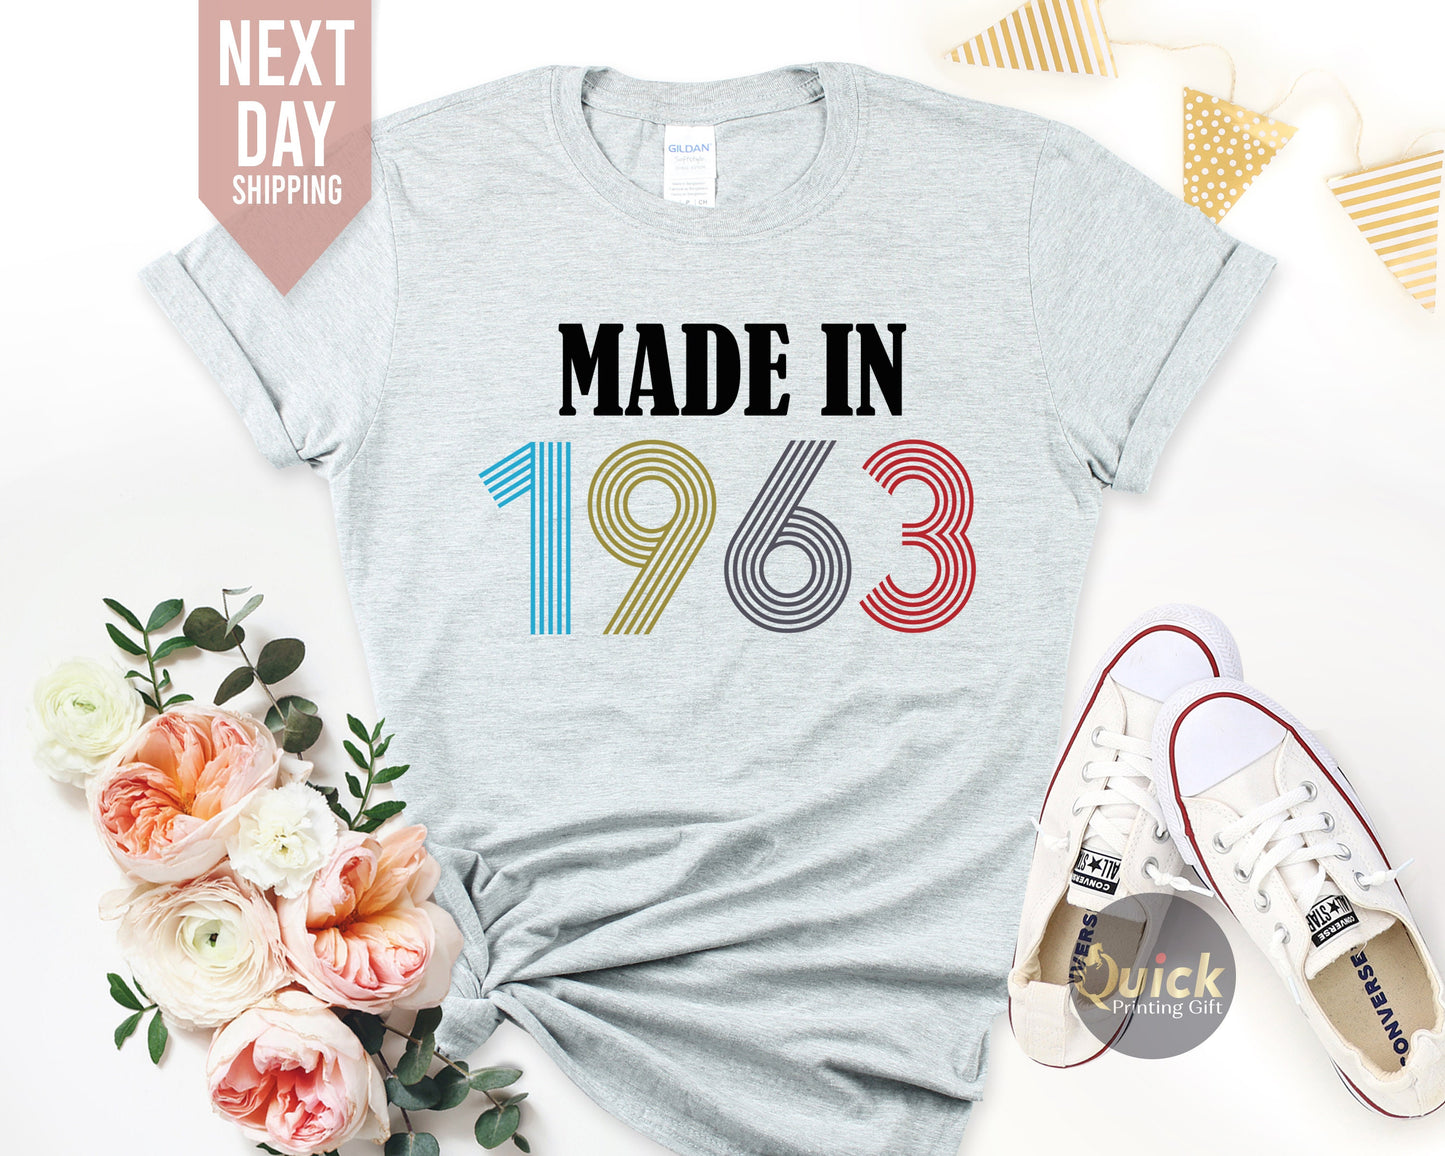 Made In 1963 T-Shirt